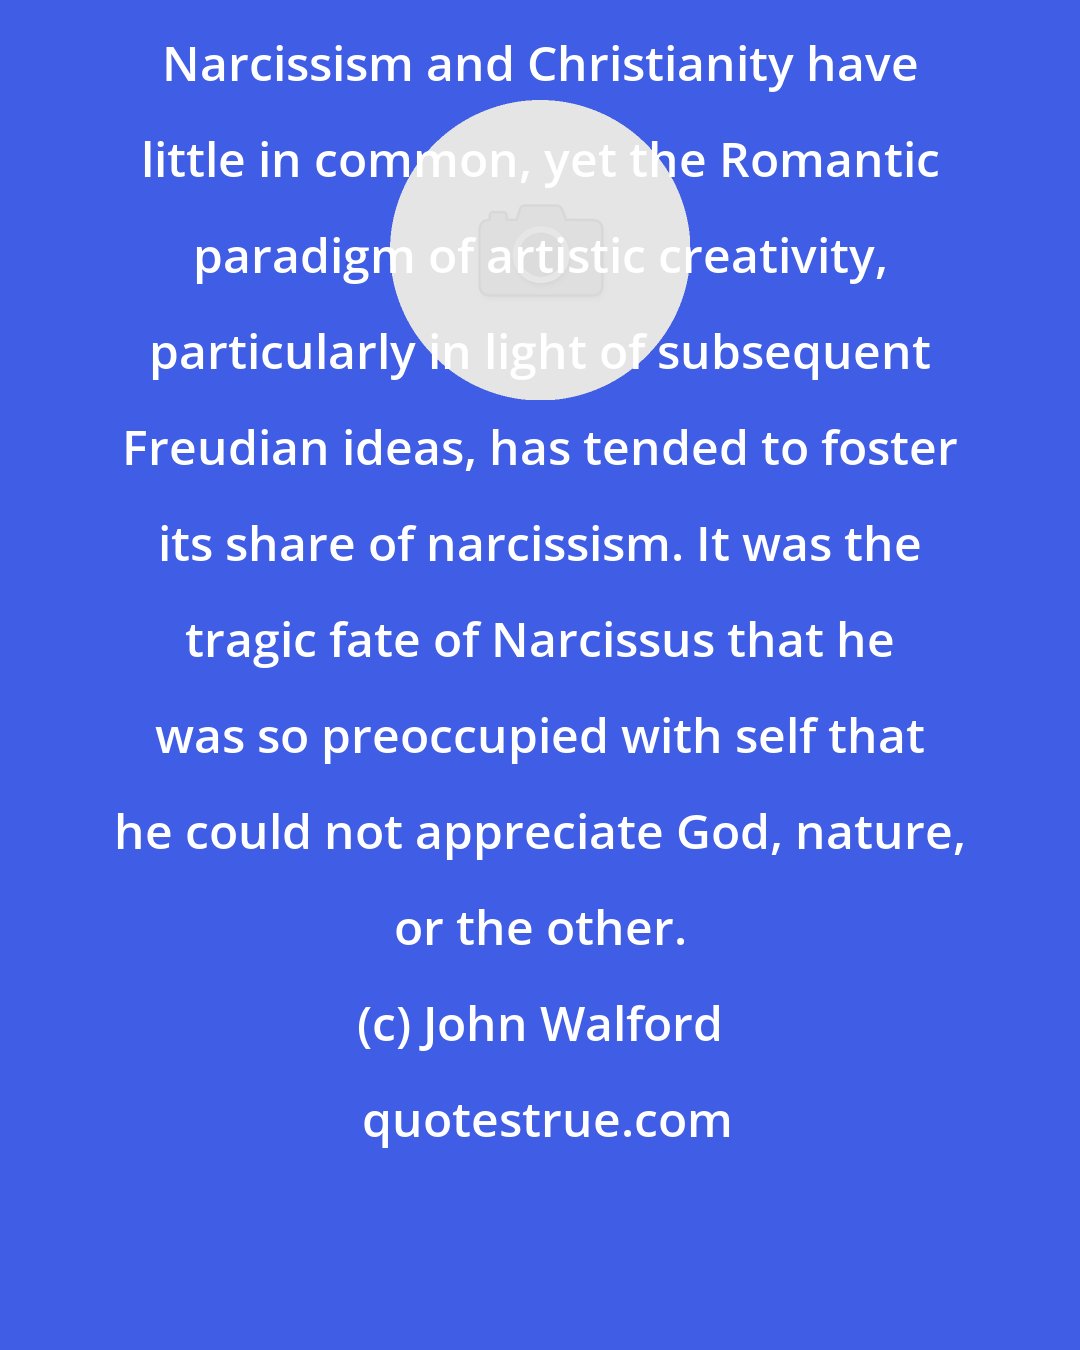 John Walford: Narcissism and Christianity have little in common, yet the Romantic paradigm of artistic creativity, particularly in light of subsequent Freudian ideas, has tended to foster its share of narcissism. It was the tragic fate of Narcissus that he was so preoccupied with self that he could not appreciate God, nature, or the other.